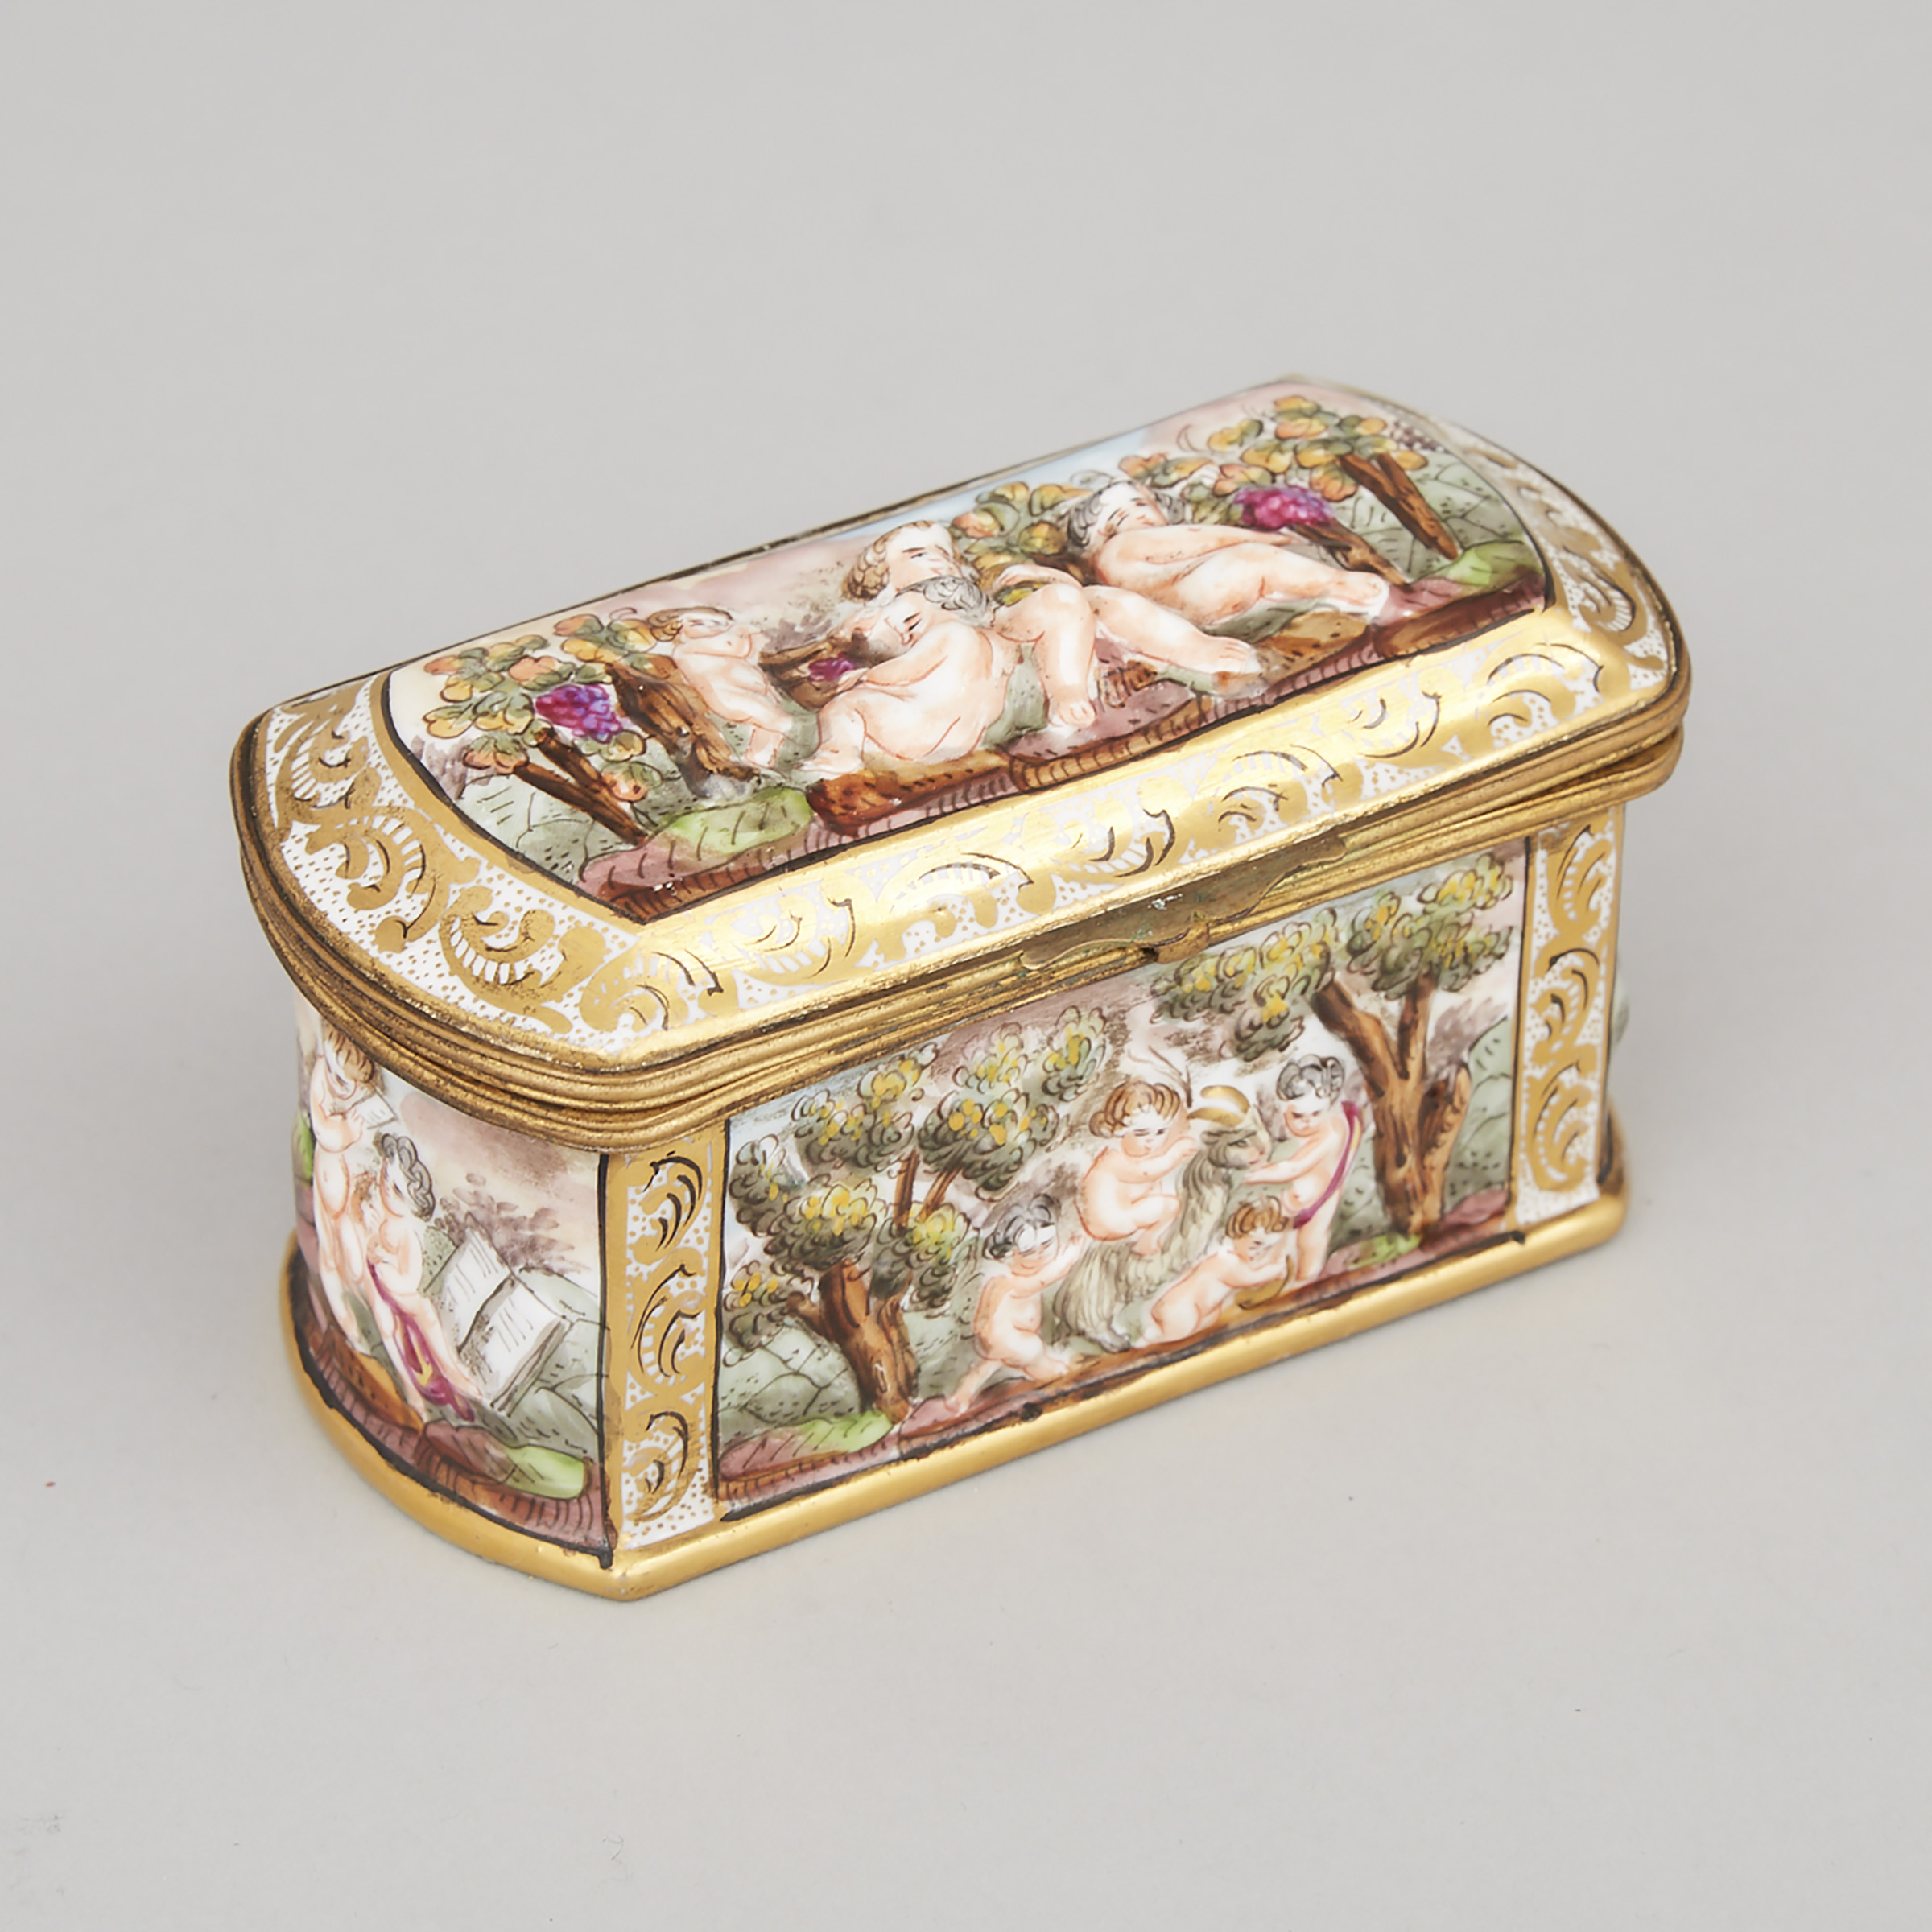 'Naples' Oblong Casket, late 19th/early 20th century